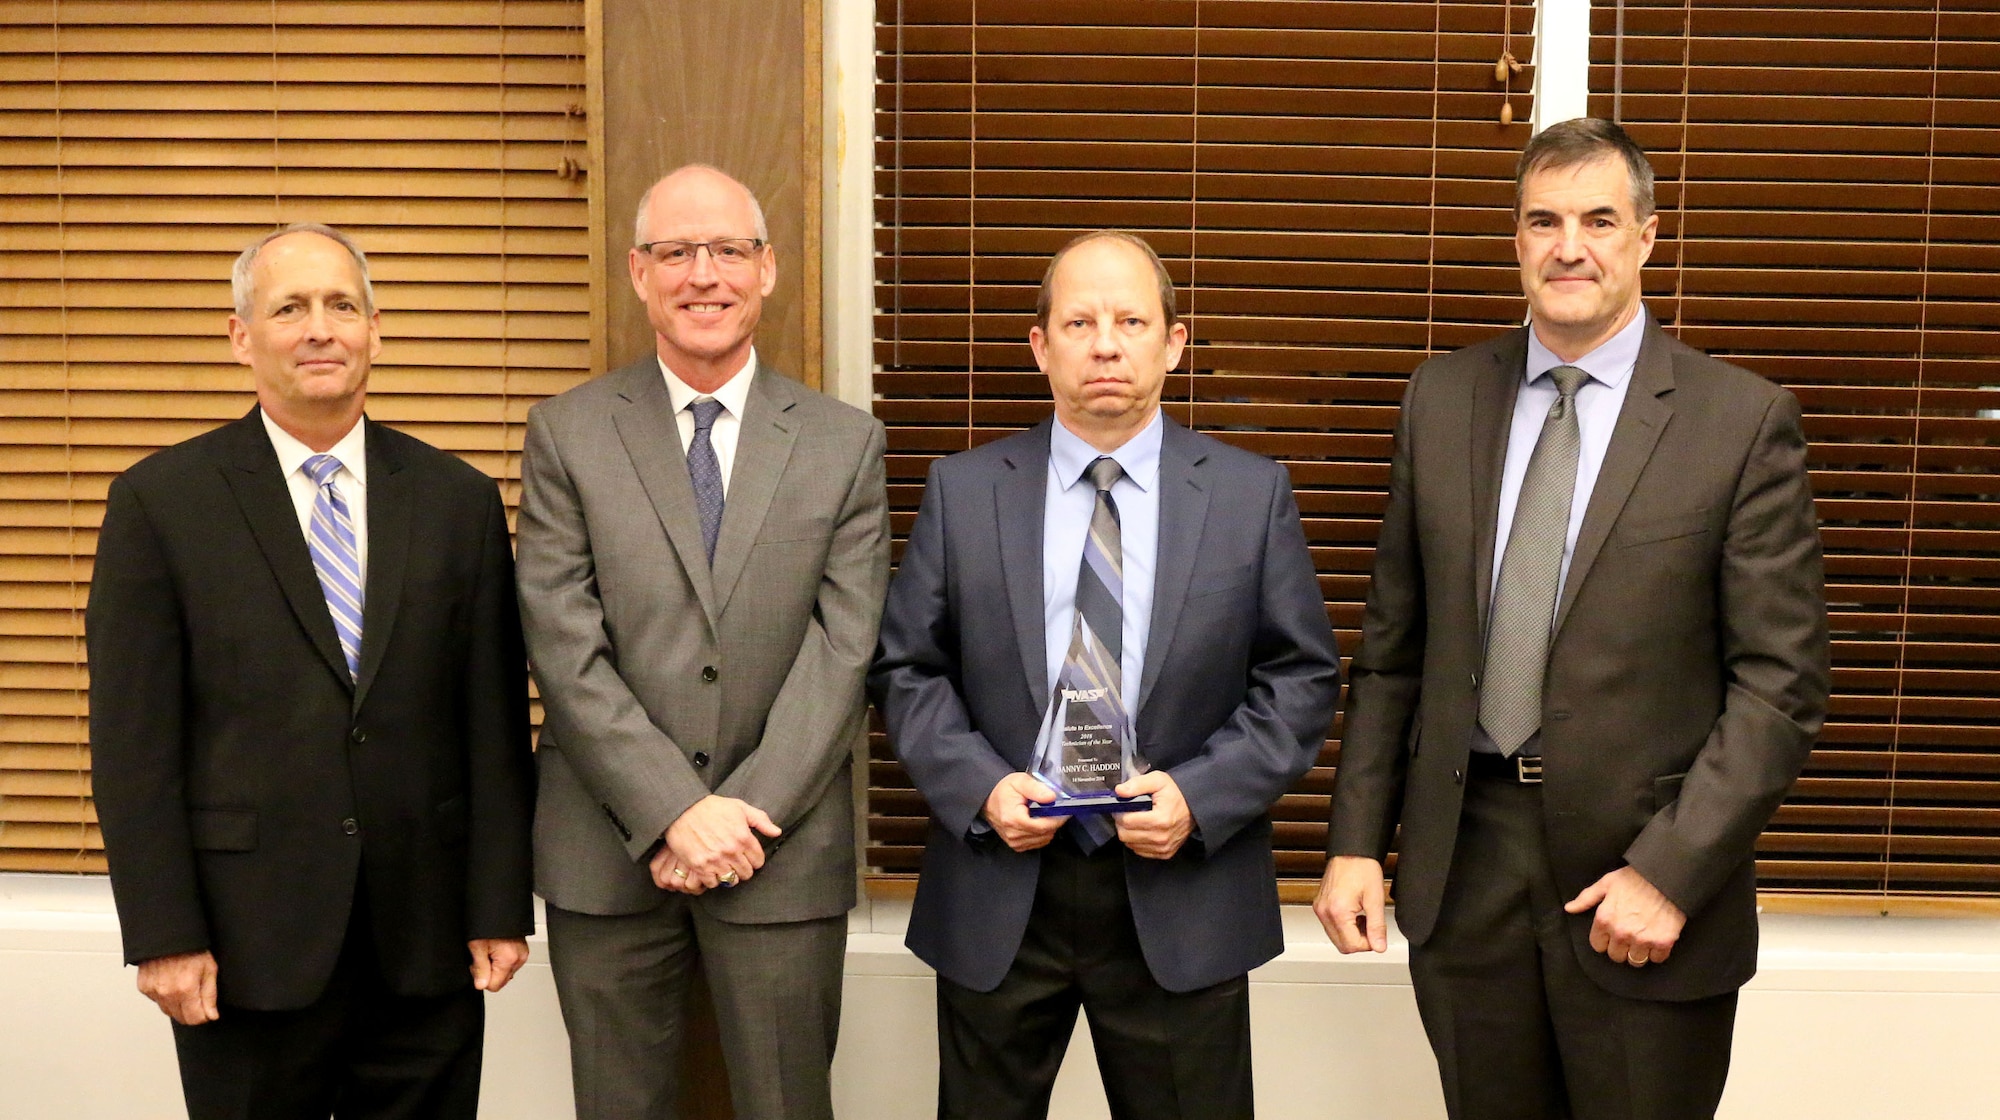 Outside Machinist Danny C. Haddon (third from left) receives the Technician of the Year Award during the National Aerospace Solutions, LLC Salute to Excellence Annual Award Ceremony Nov. 14, 2018, at the Arnold Lakeside Center, Arnold Air Force Base, Tenn. Also pictured from left is NAS Deputy General Manager Michael Belzil, NAS General Manager Richard Tighe and NAS Mission Execution Director Roderick Cregier. (U.S. Air Force photo by Bradley Hicks)